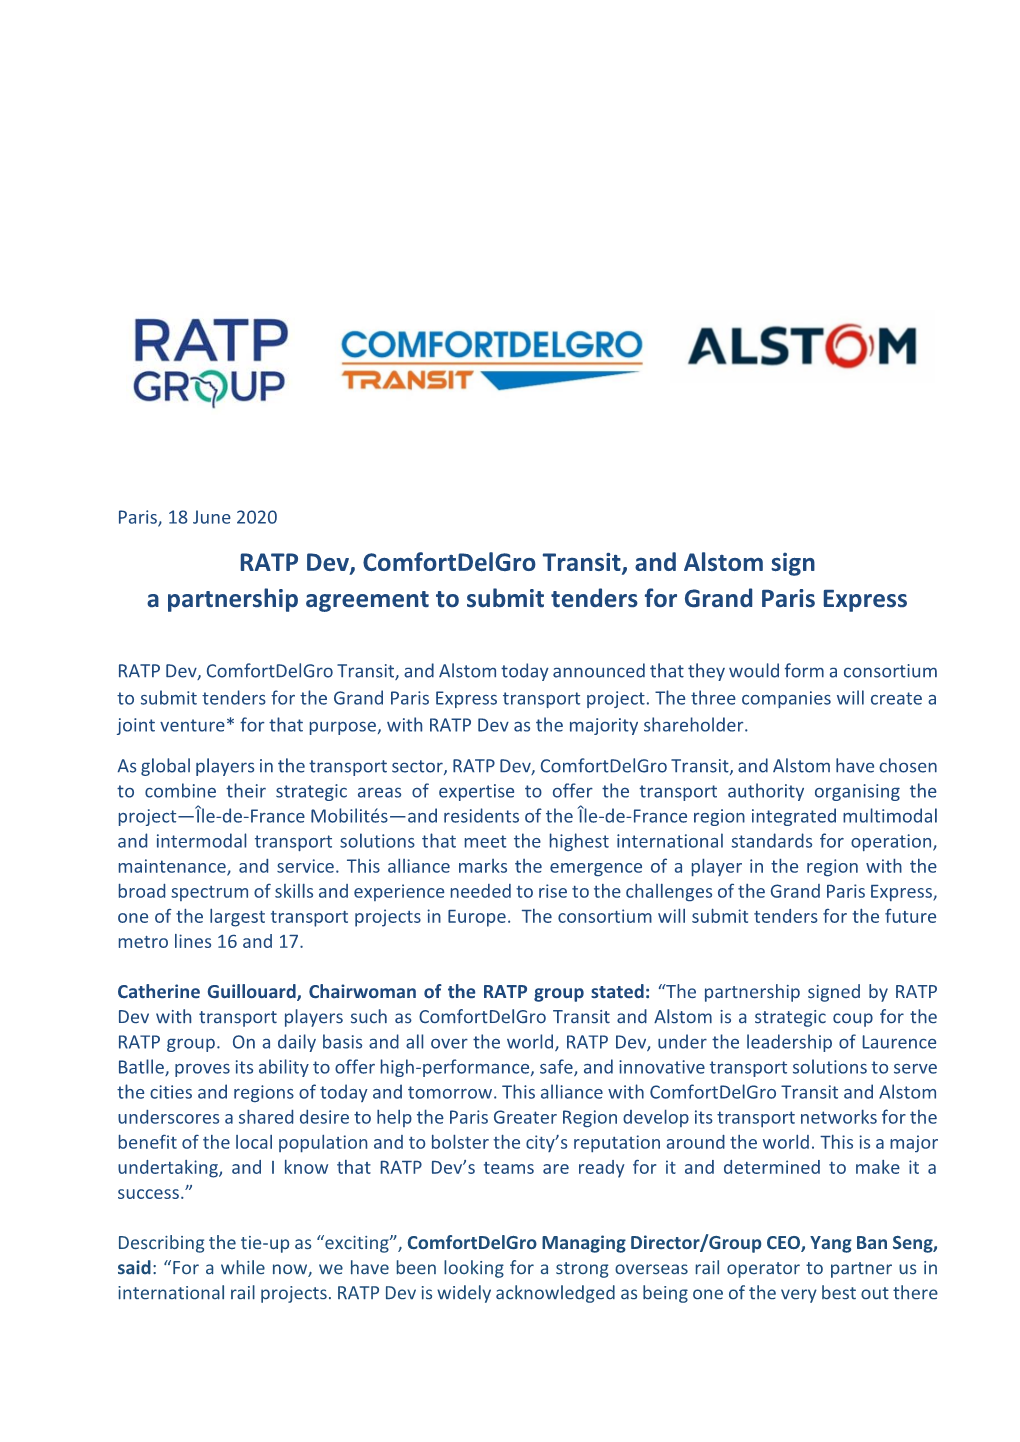 RATP Dev, Comfortdelgro Transit, and Alstom Sign a Partnership Agreement to Submit Tenders for Grand Paris Express